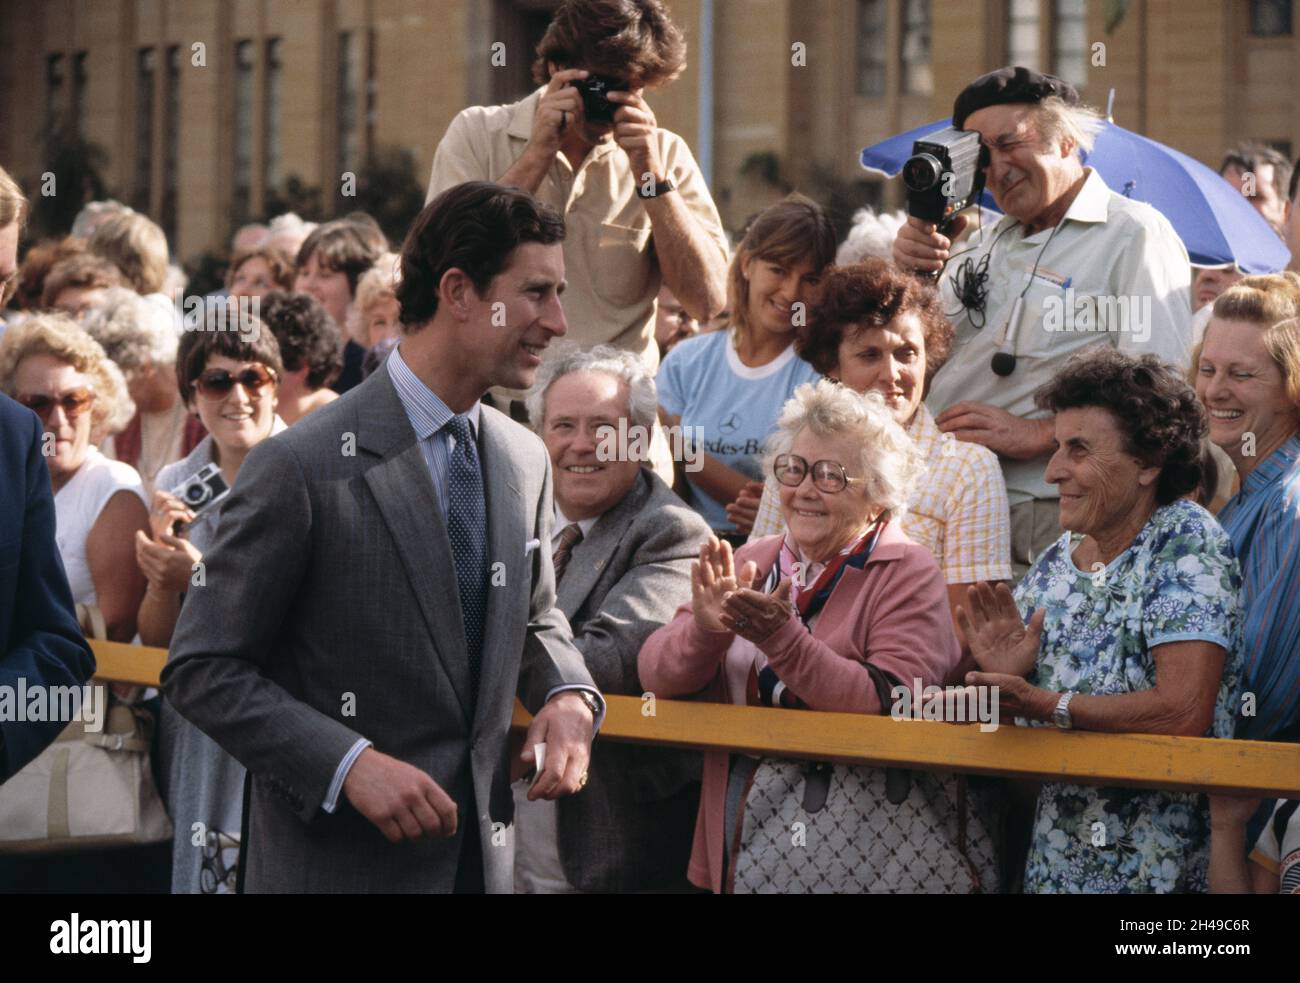 United Kingdom. England. London. British Royal Family. Prince Charles outdoors engaging with a crowd of people. Stock Photo